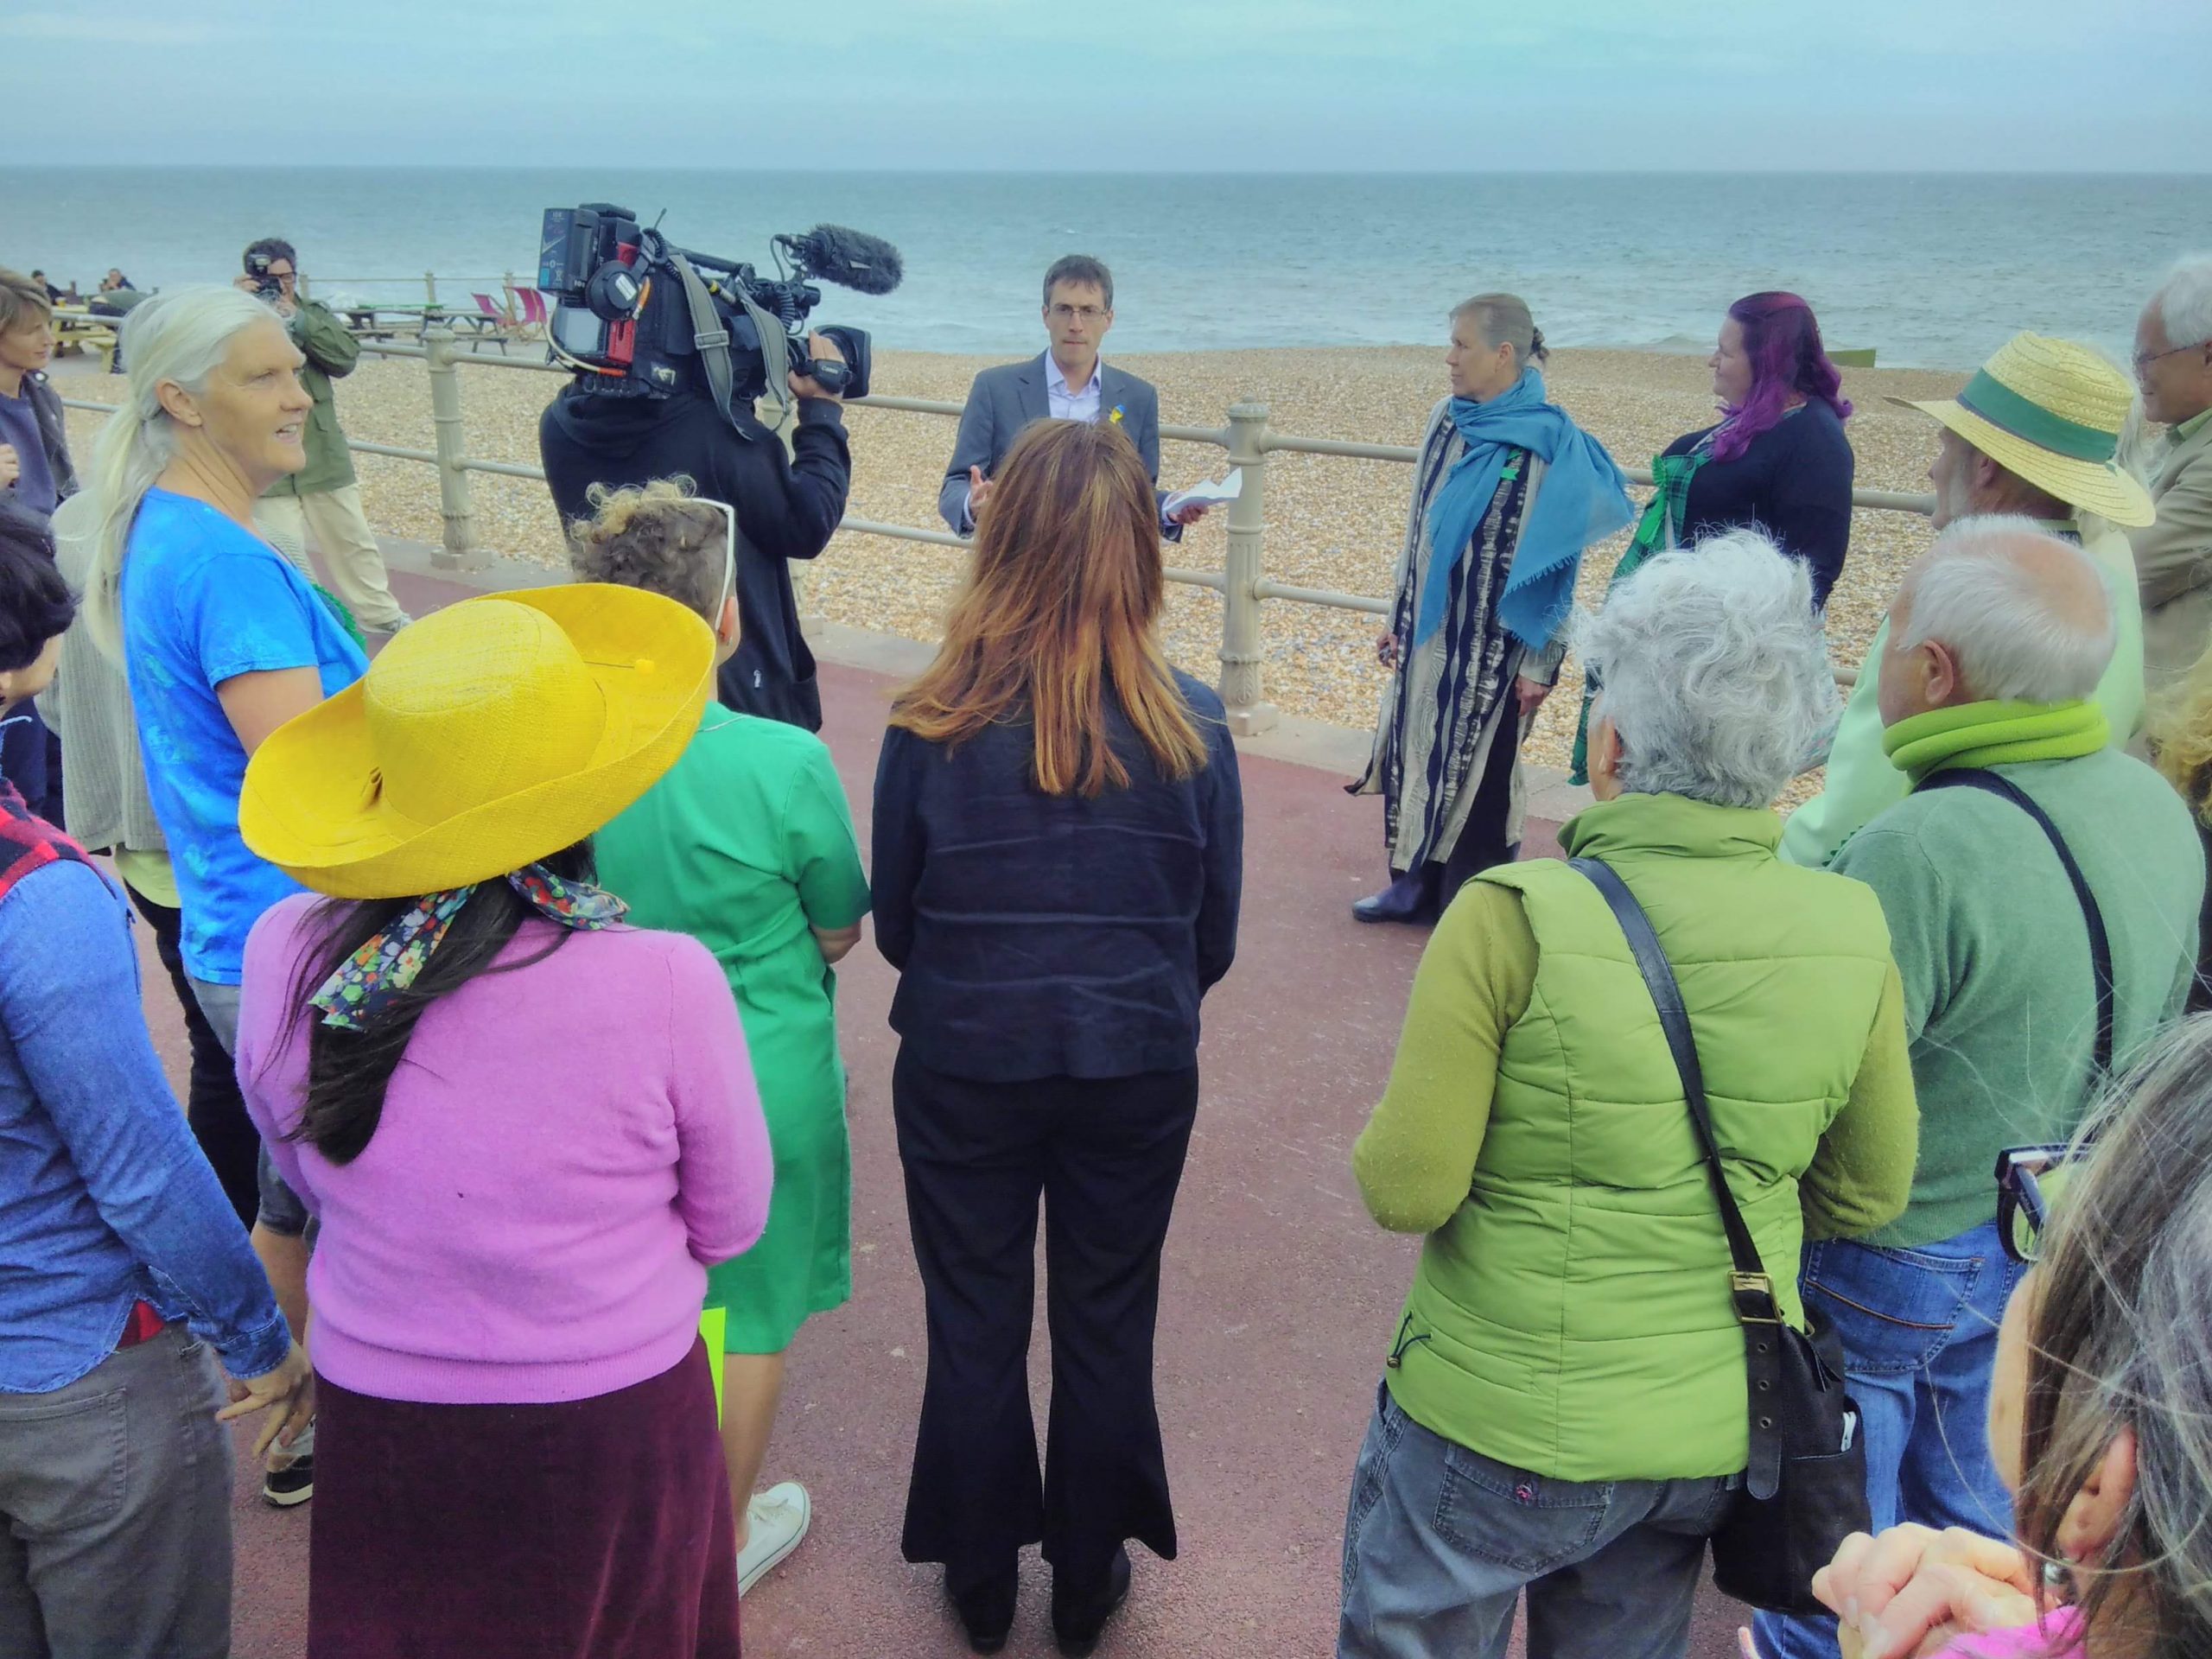 Adrian Ramsay, co-leader of the Green Party of England and Wales, joining newly elected Councillors on Hastings Prom